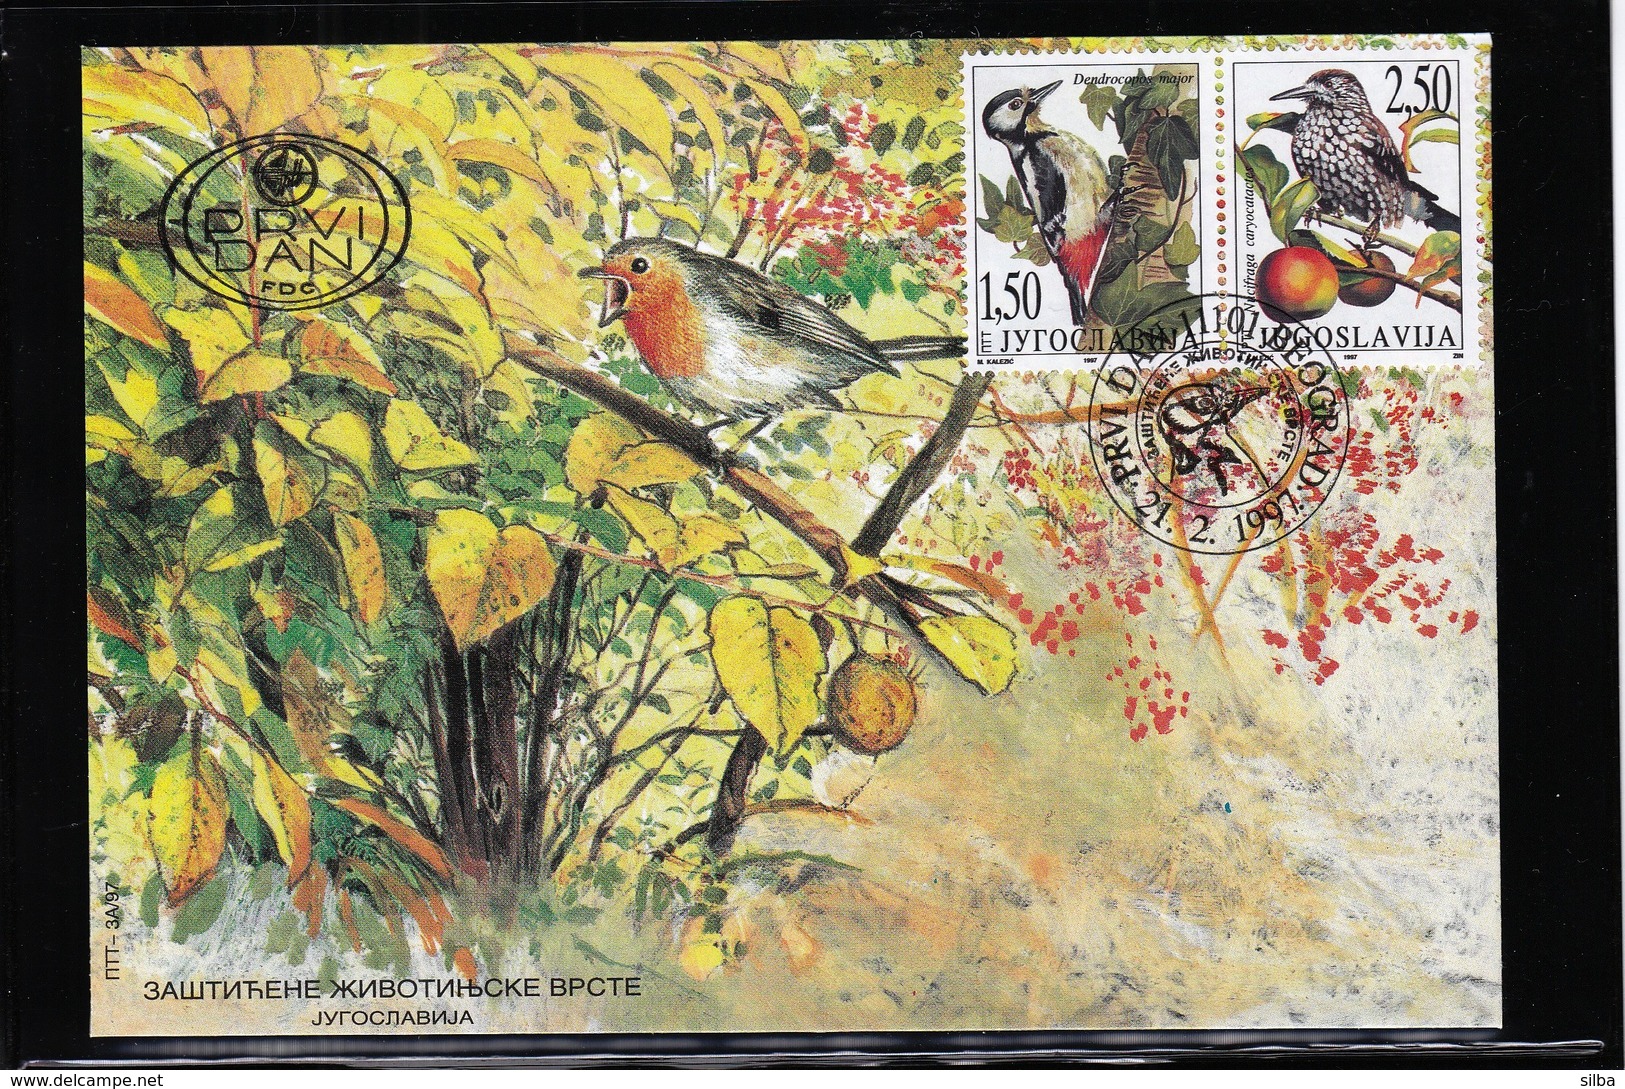 Yugoslavia 1995, 1996, 1997 / Flora and Fauna on Yugoslav Postage Stamps / 20 stamps + 10 FDC